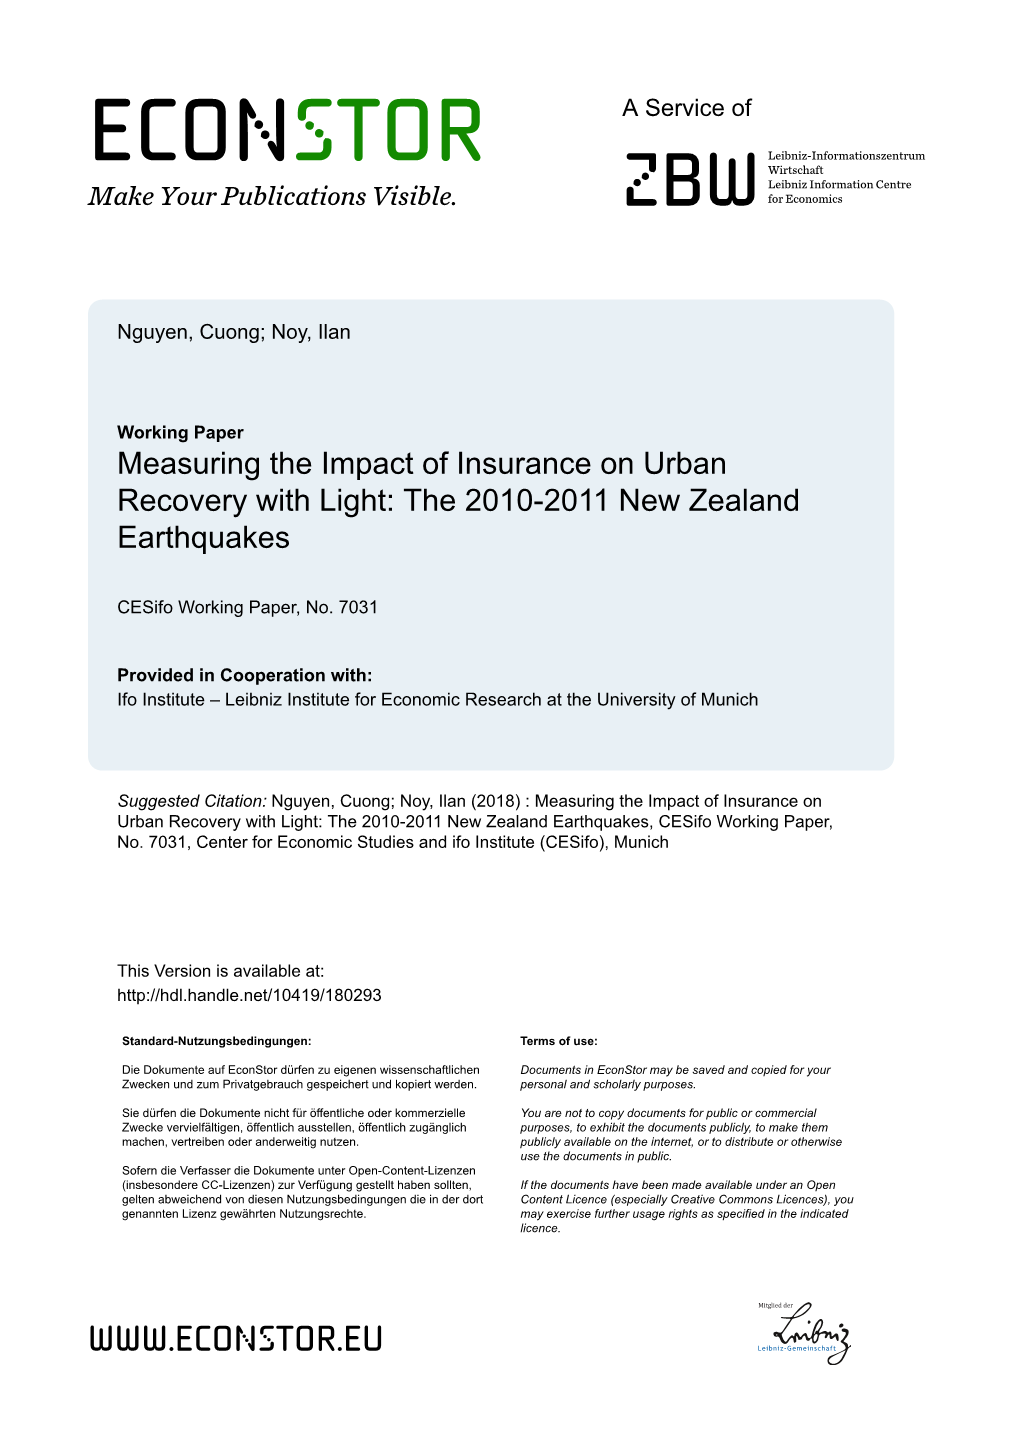 Measuring the Impact of Insurance on Urban Recovery with Light: the 2010-2011 New Zealand Earthquakes